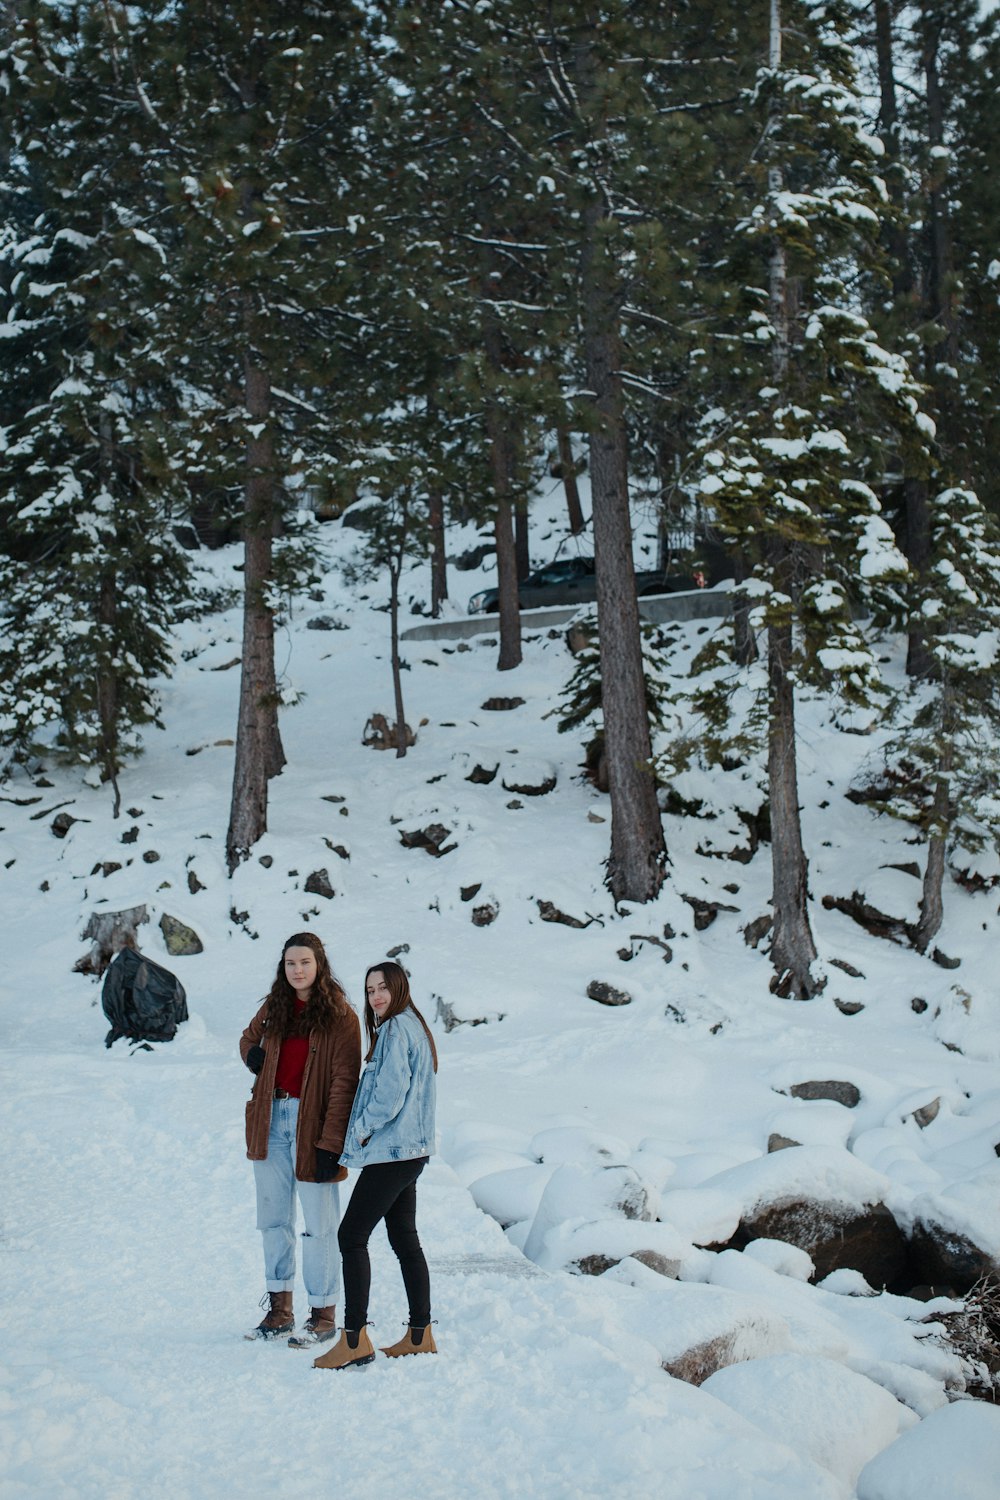 2 women standing on snow covered ground near trees during daytime